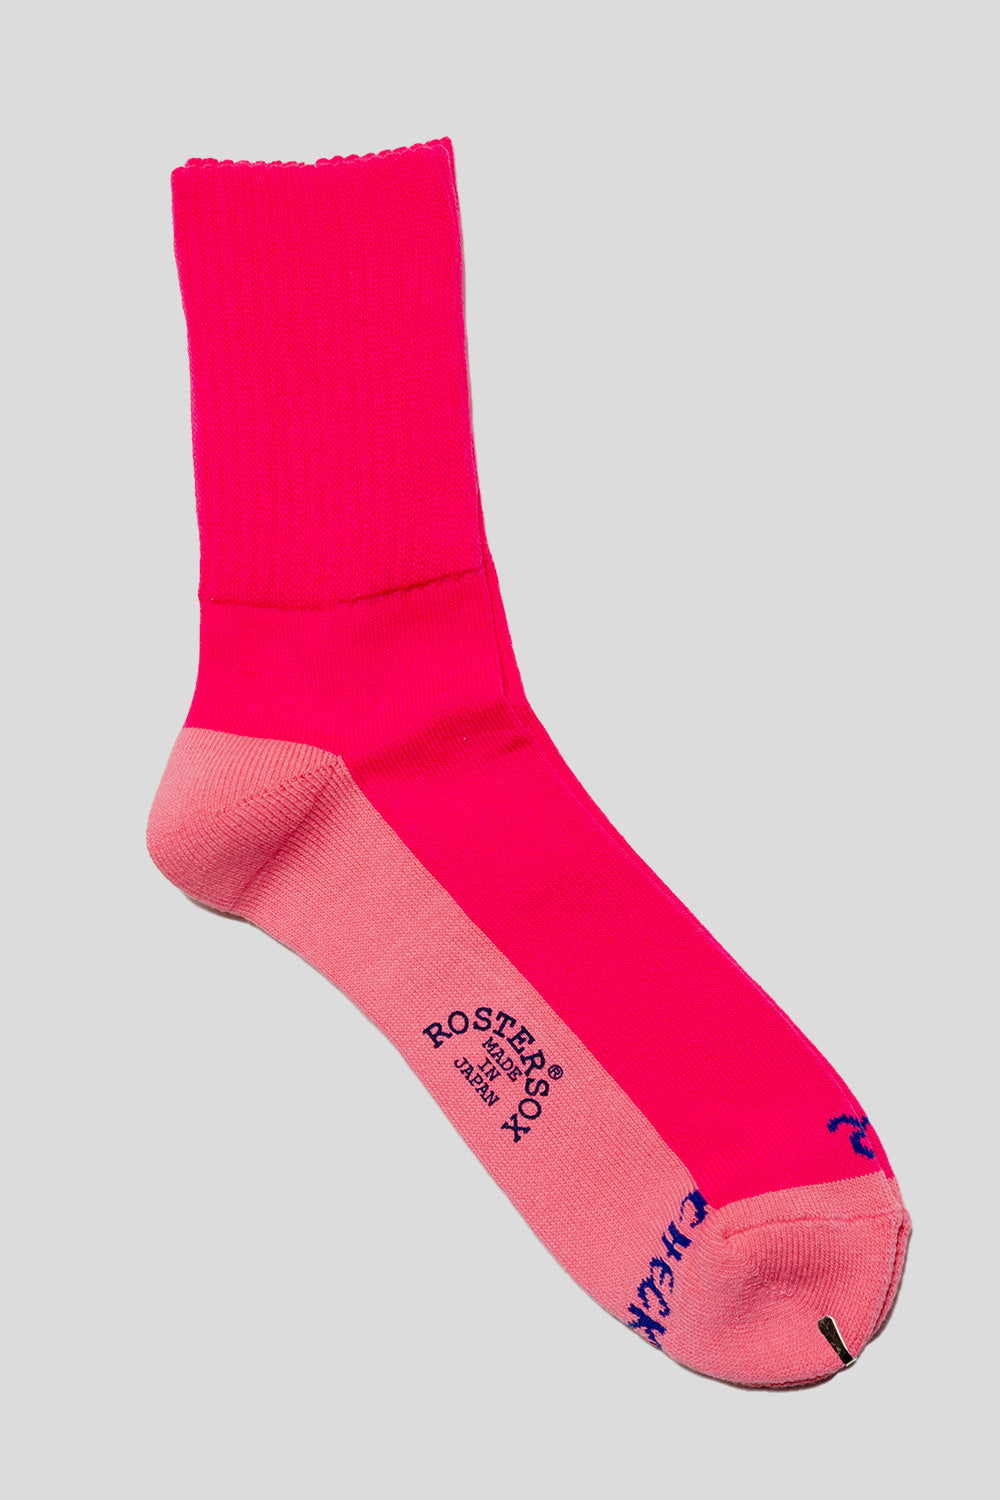 Rostersox Neo Socks in Pink